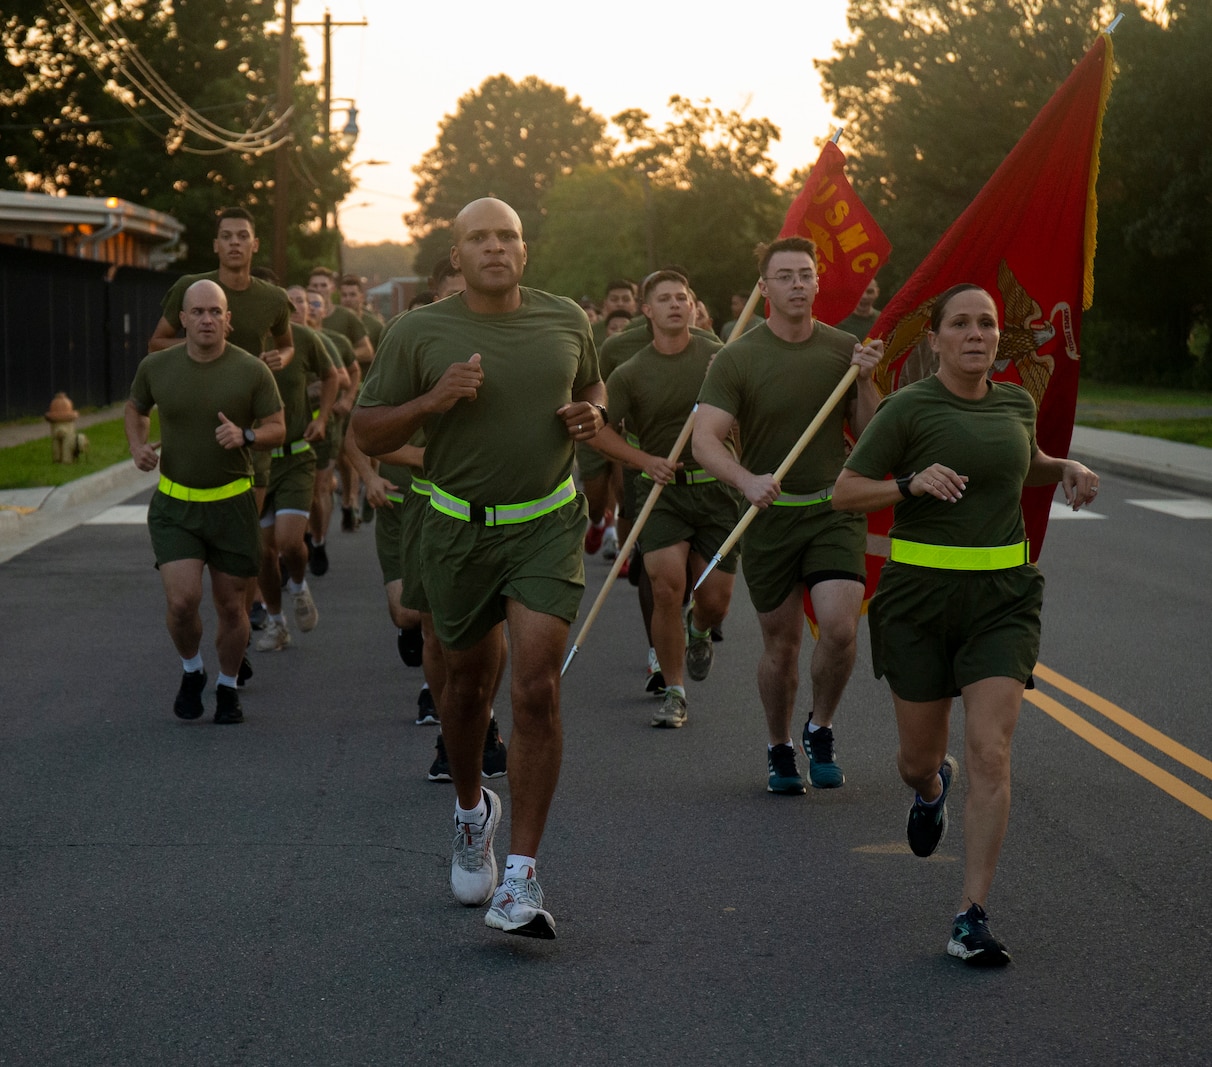 U.S. Marine Corps Lt. Col. David S. Rainey (Left), the Security Battalion Commanding Officer, and Sgt. Maj. Jacqueline Townsel (Right), the Security Battalion Sgt. Maj., lead the unit formation run at Marine Corps Base Quantico, Virginia, Aug. 24, 2022. The motivational run built camaraderie and unit cohesion, and promoted physical fitness among Marines. (U.S. Marine Corps photo by Cpl. Andrew Herwig)